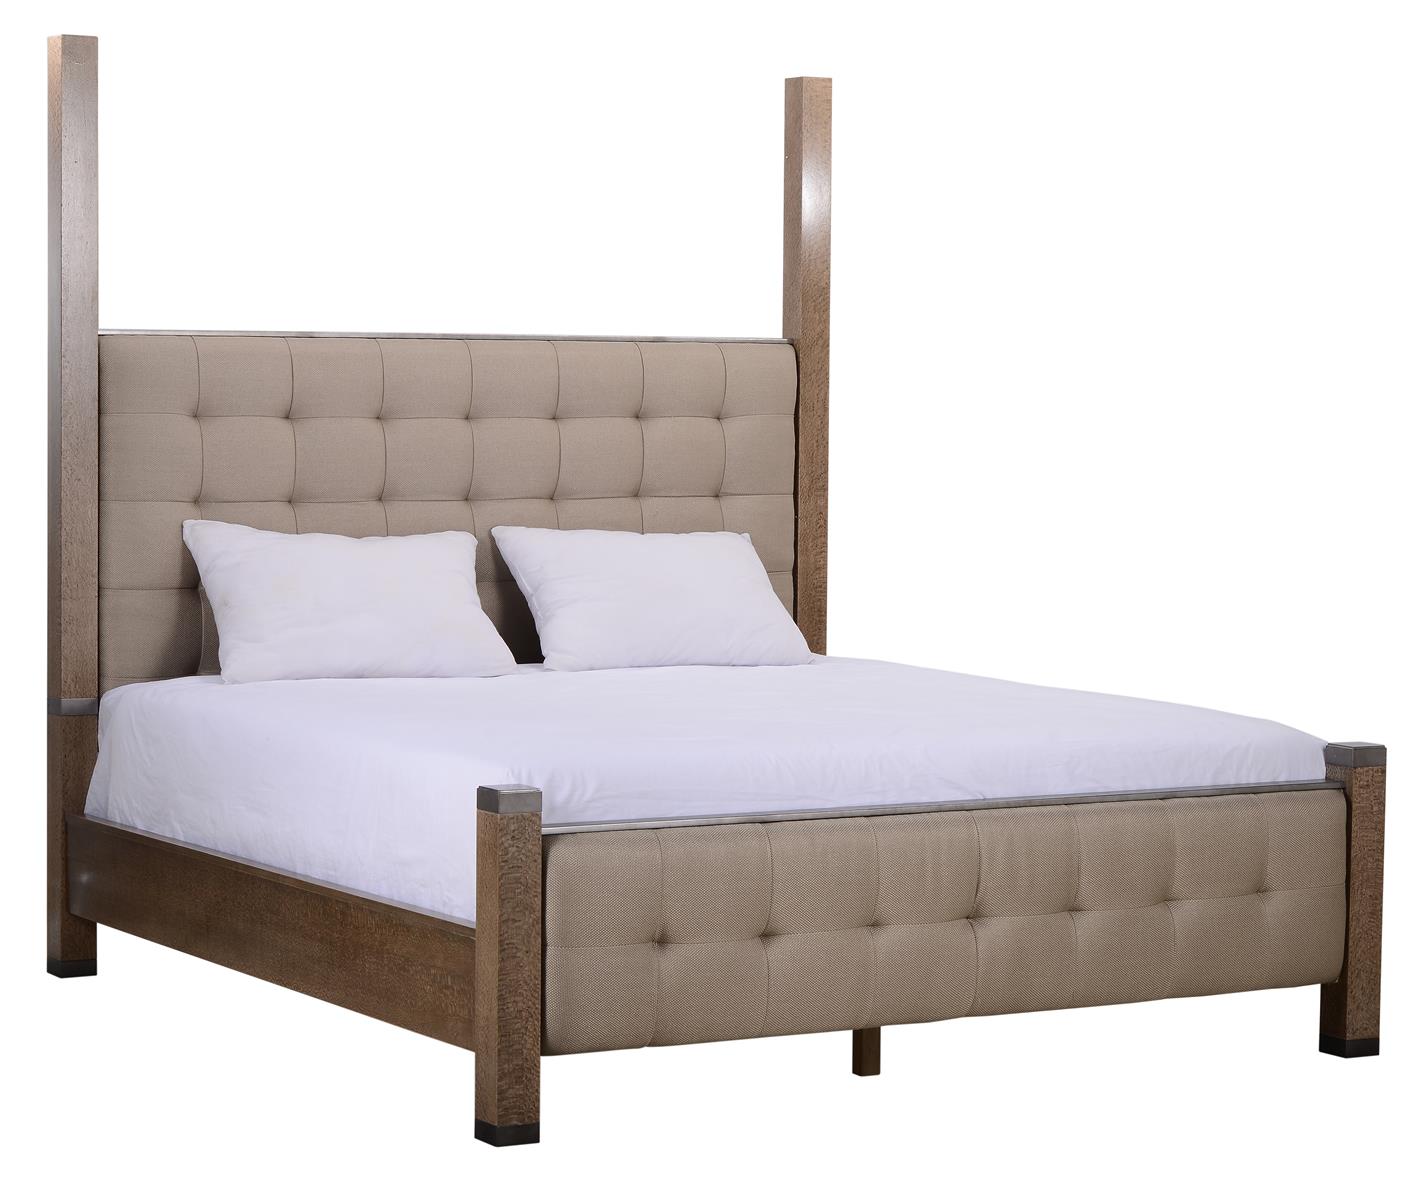 PROSSIMO - ALTO 6/6 POSTER BED